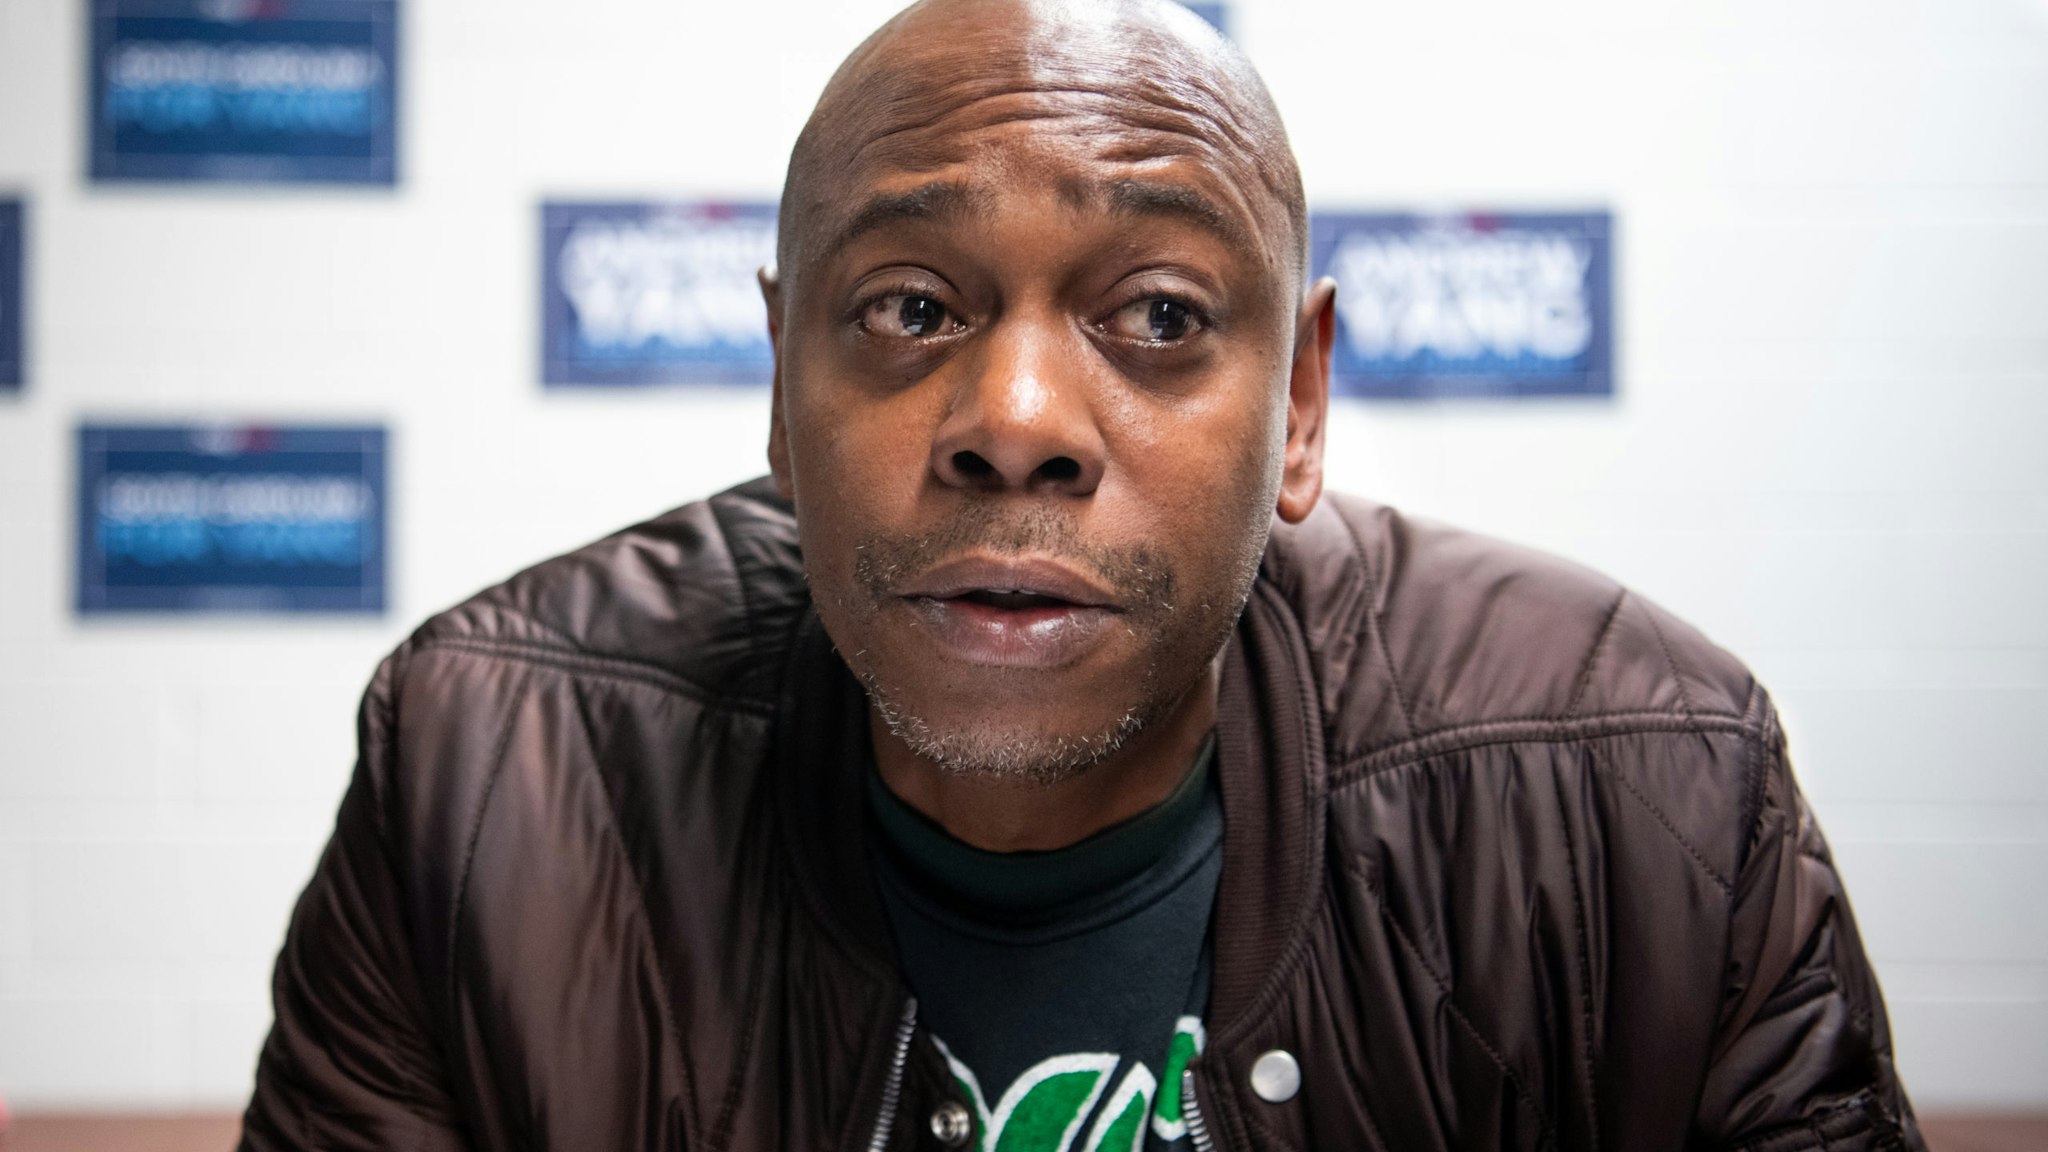 HARLESTON, SC - JANUARY 30: Comedian Dave Chappelle talks with the media while campaigning for Democratic presidential candidate Andrew Yang on January 30, 2020 in North Charleston, South Carolina. The comedian has endorsed the candidate and performs the second of two South Carolina campaign benefit shows Thursday evening in Charleston. (Photo by Sean Rayford/Getty Images)